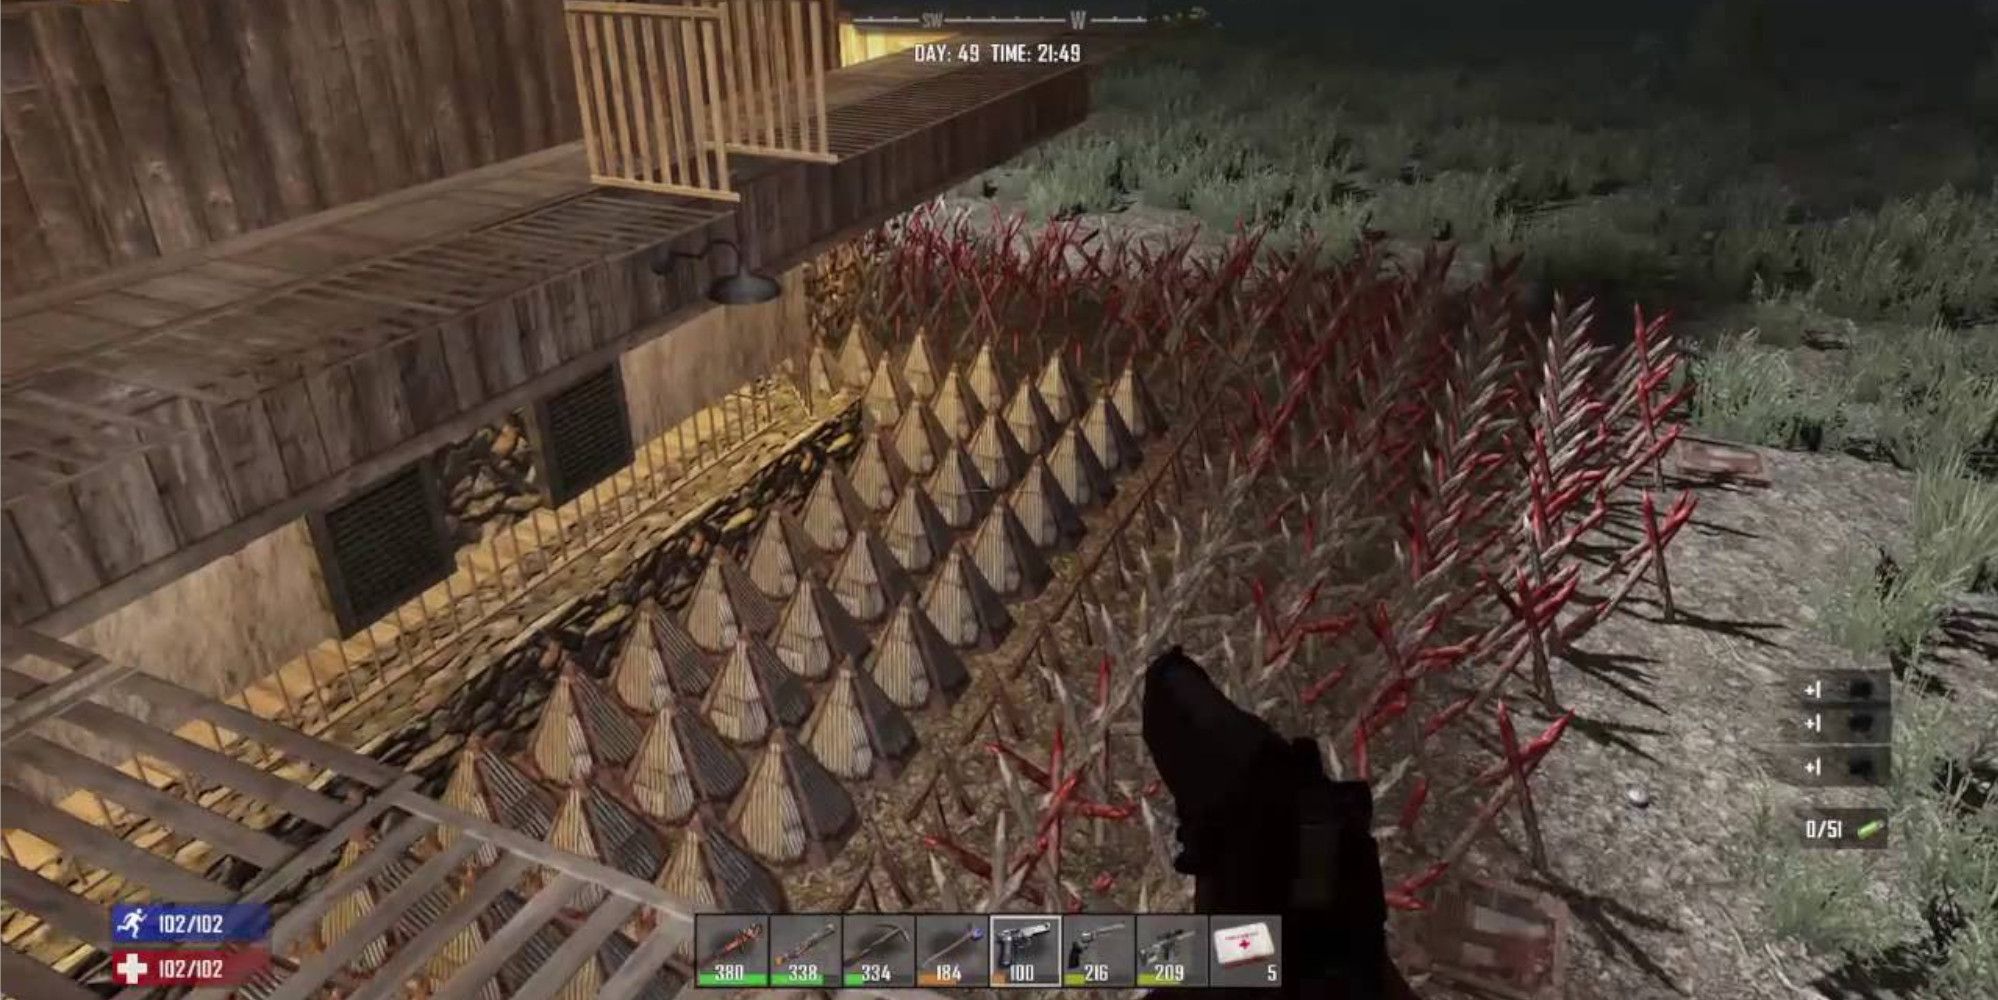 7 days todie horde defense - wooden spikes and wooden barricades designed to stop zombies